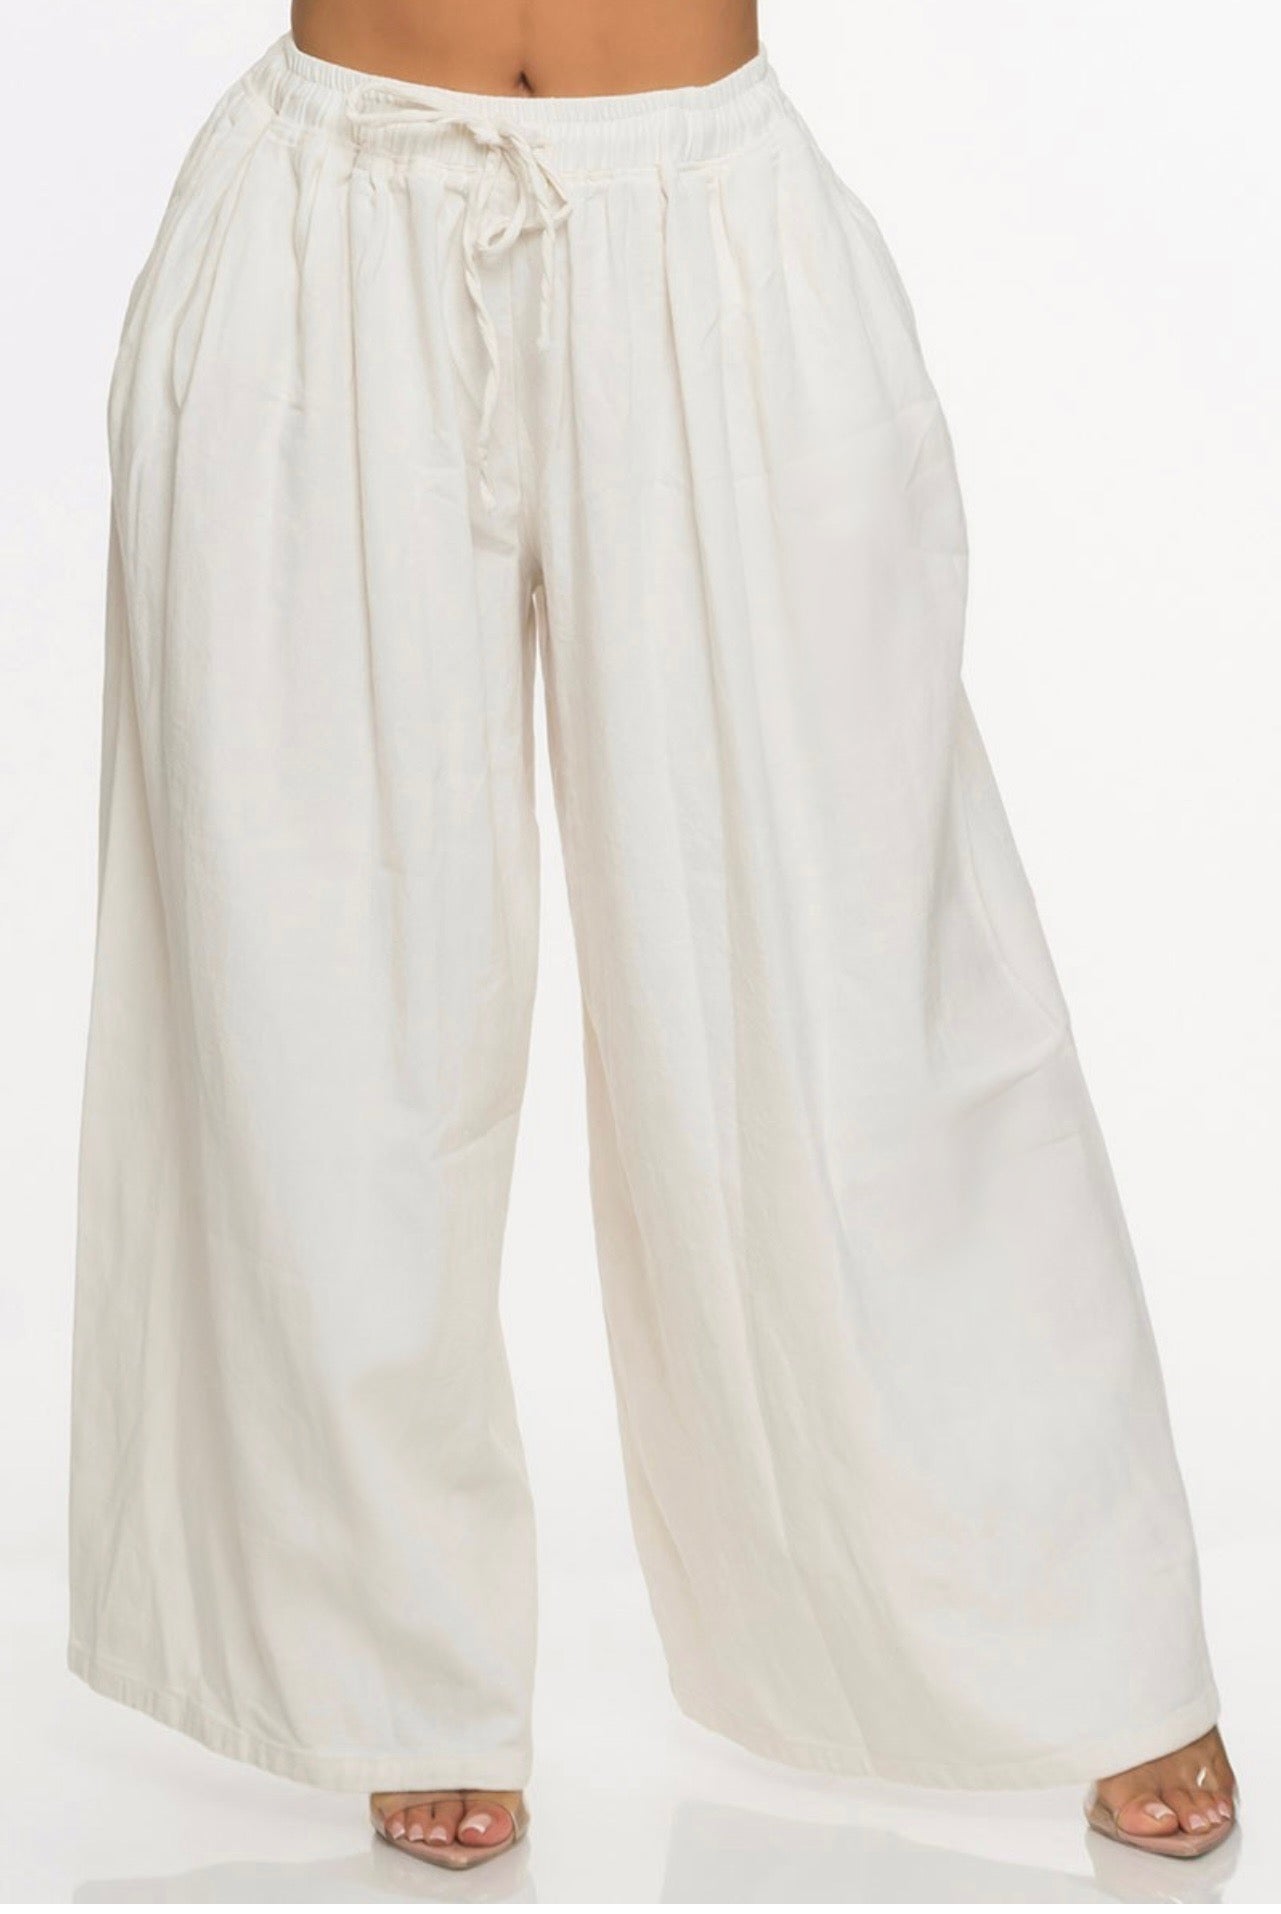 Very Wide Leg Pants(off white)